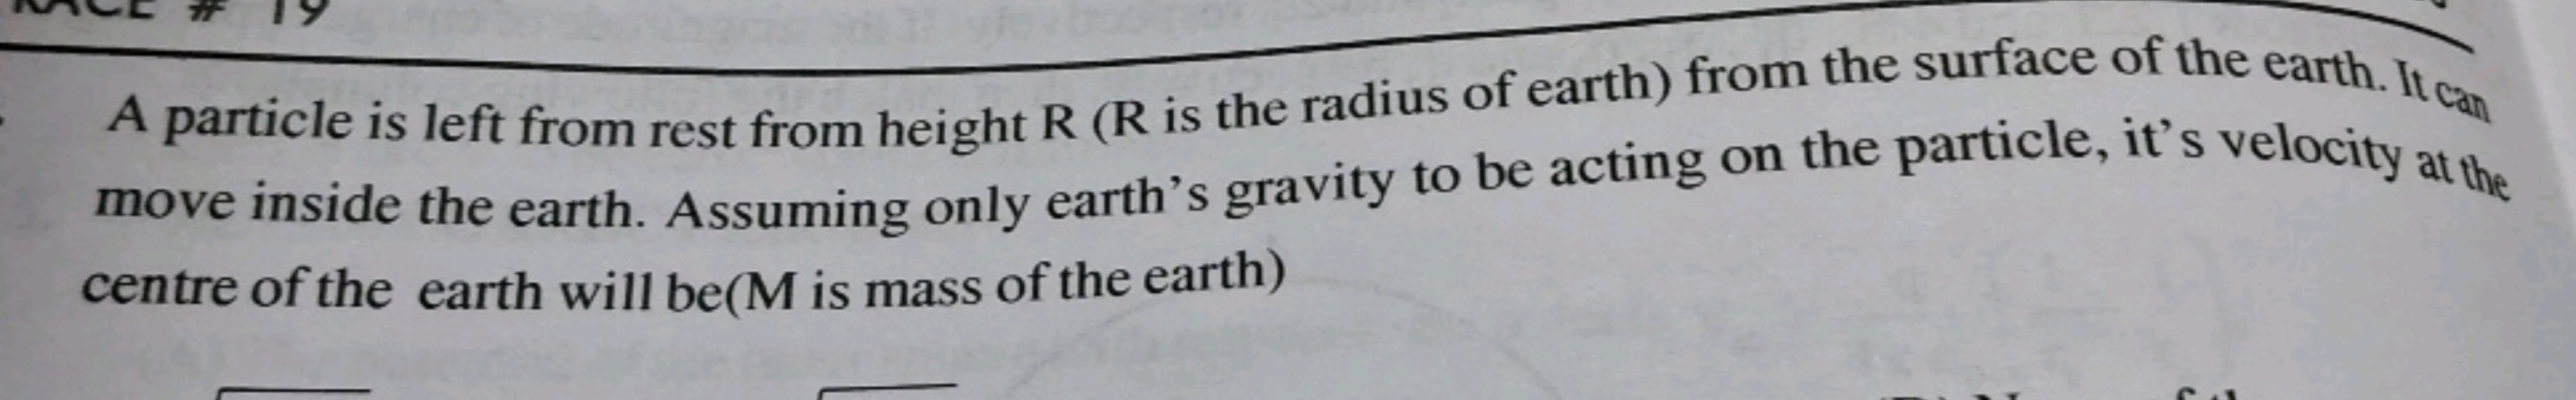 A particle is left from rest from height R ( R is the radius of earth)